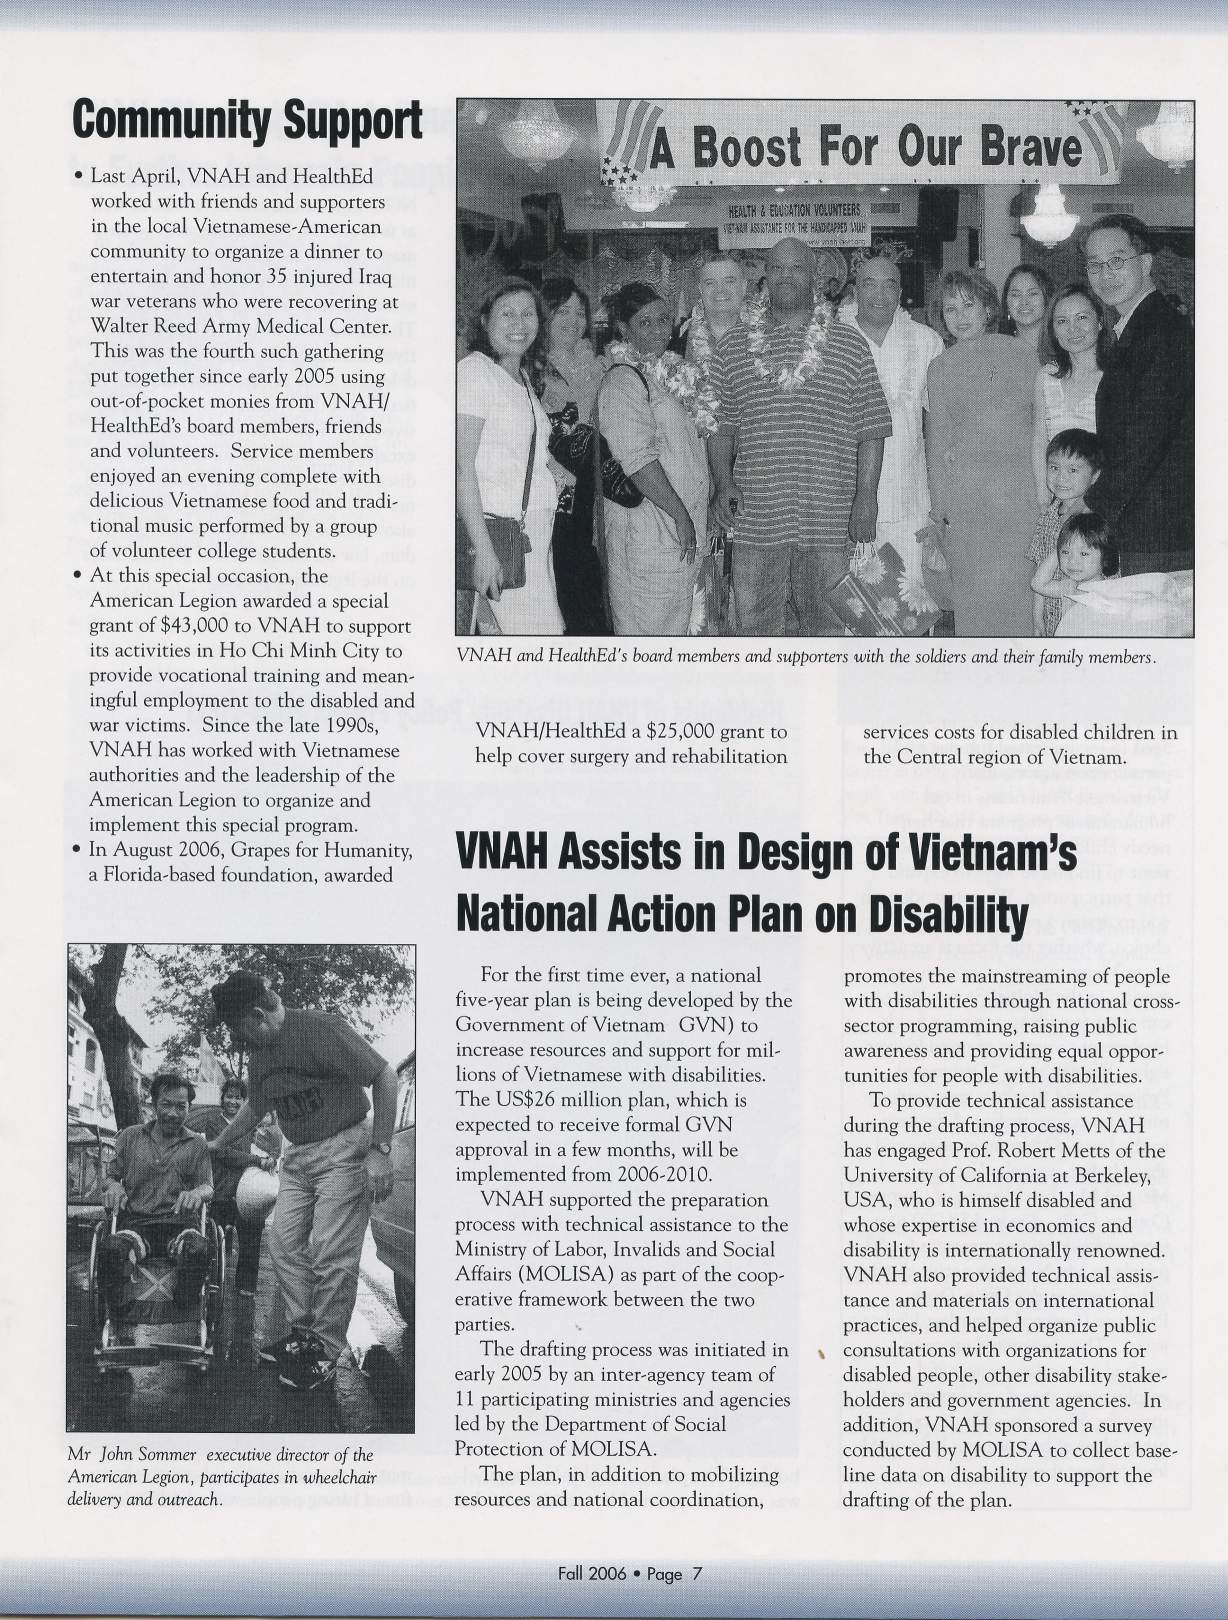 VNAH Launches New Program to Promote "Inclusion of Vietnamese with Disabilities" Part 3